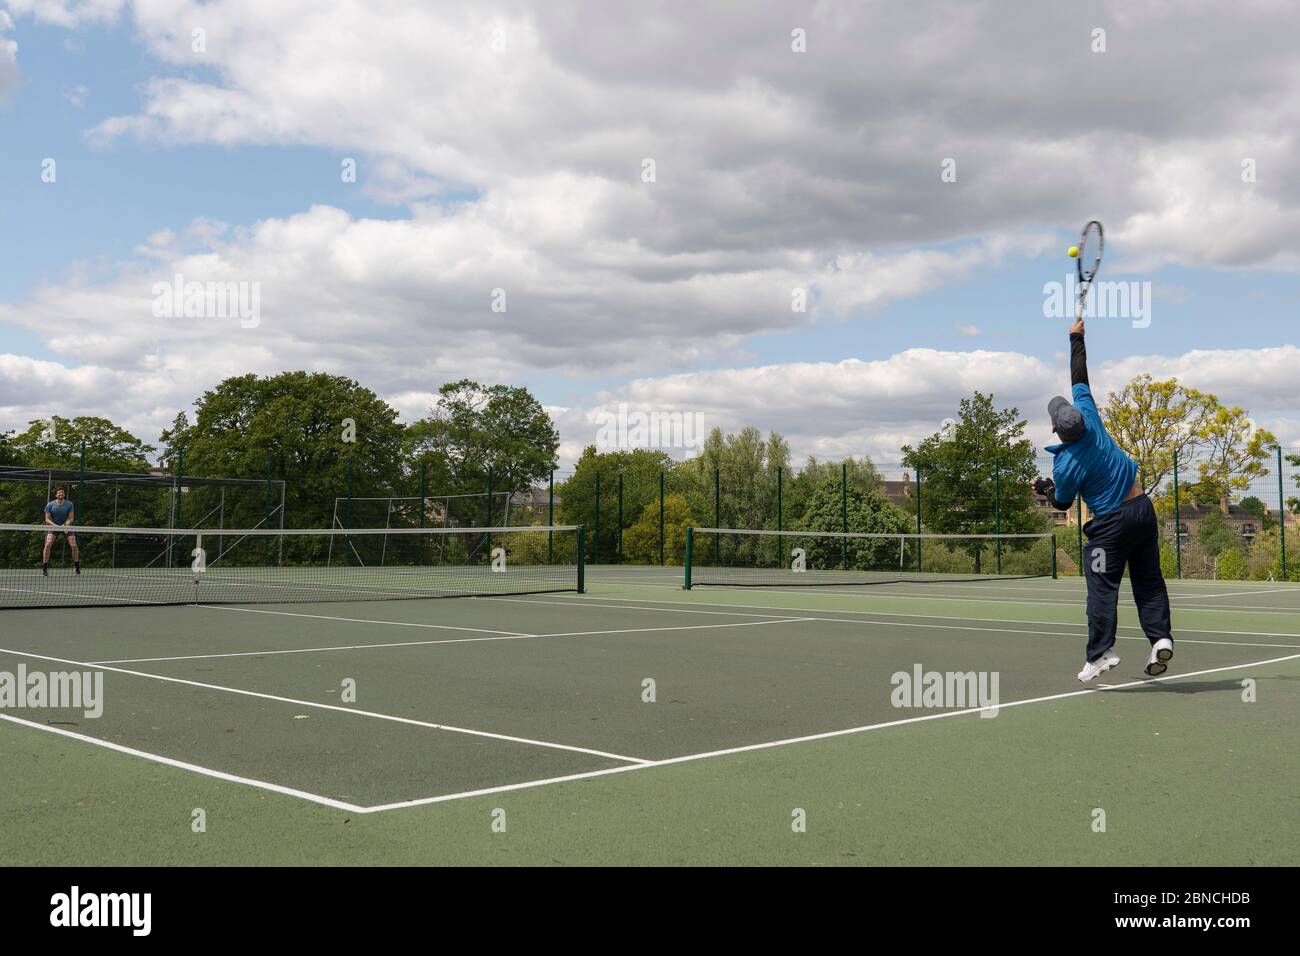 Brockwell Park, UK. 14th May 2020. People playing tennis in Brockwell Park  following Government advice that lockdown rules have been relaxed for a  small number of sports. Tennis, along with golf and